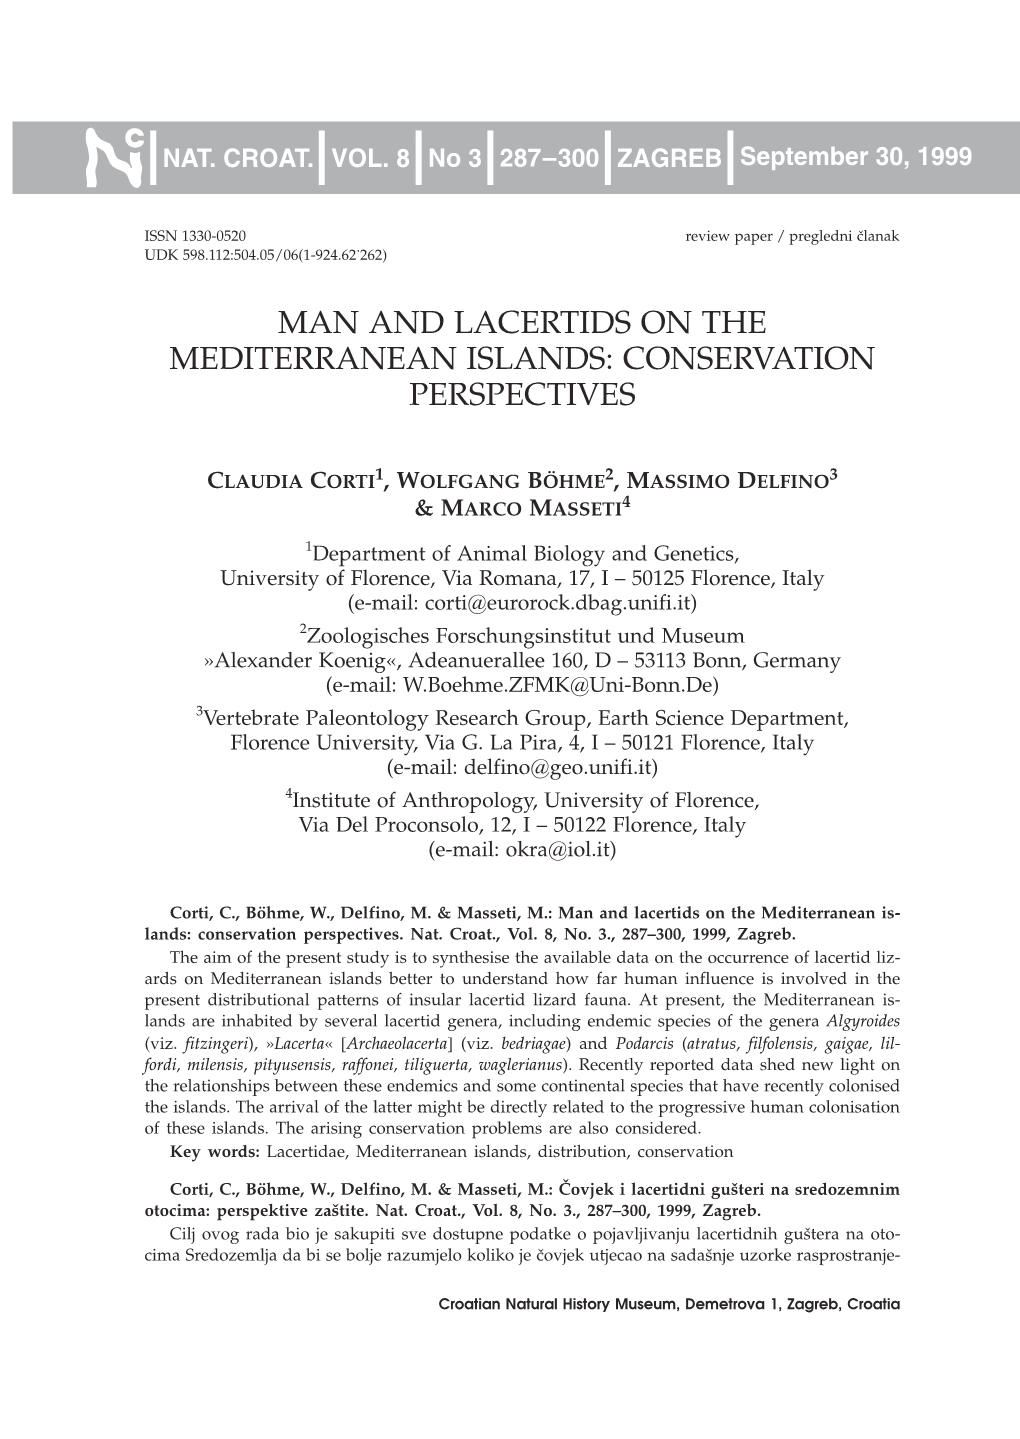 Man and Lacertids on the Mediterranean Islands: Conservation Perspectives